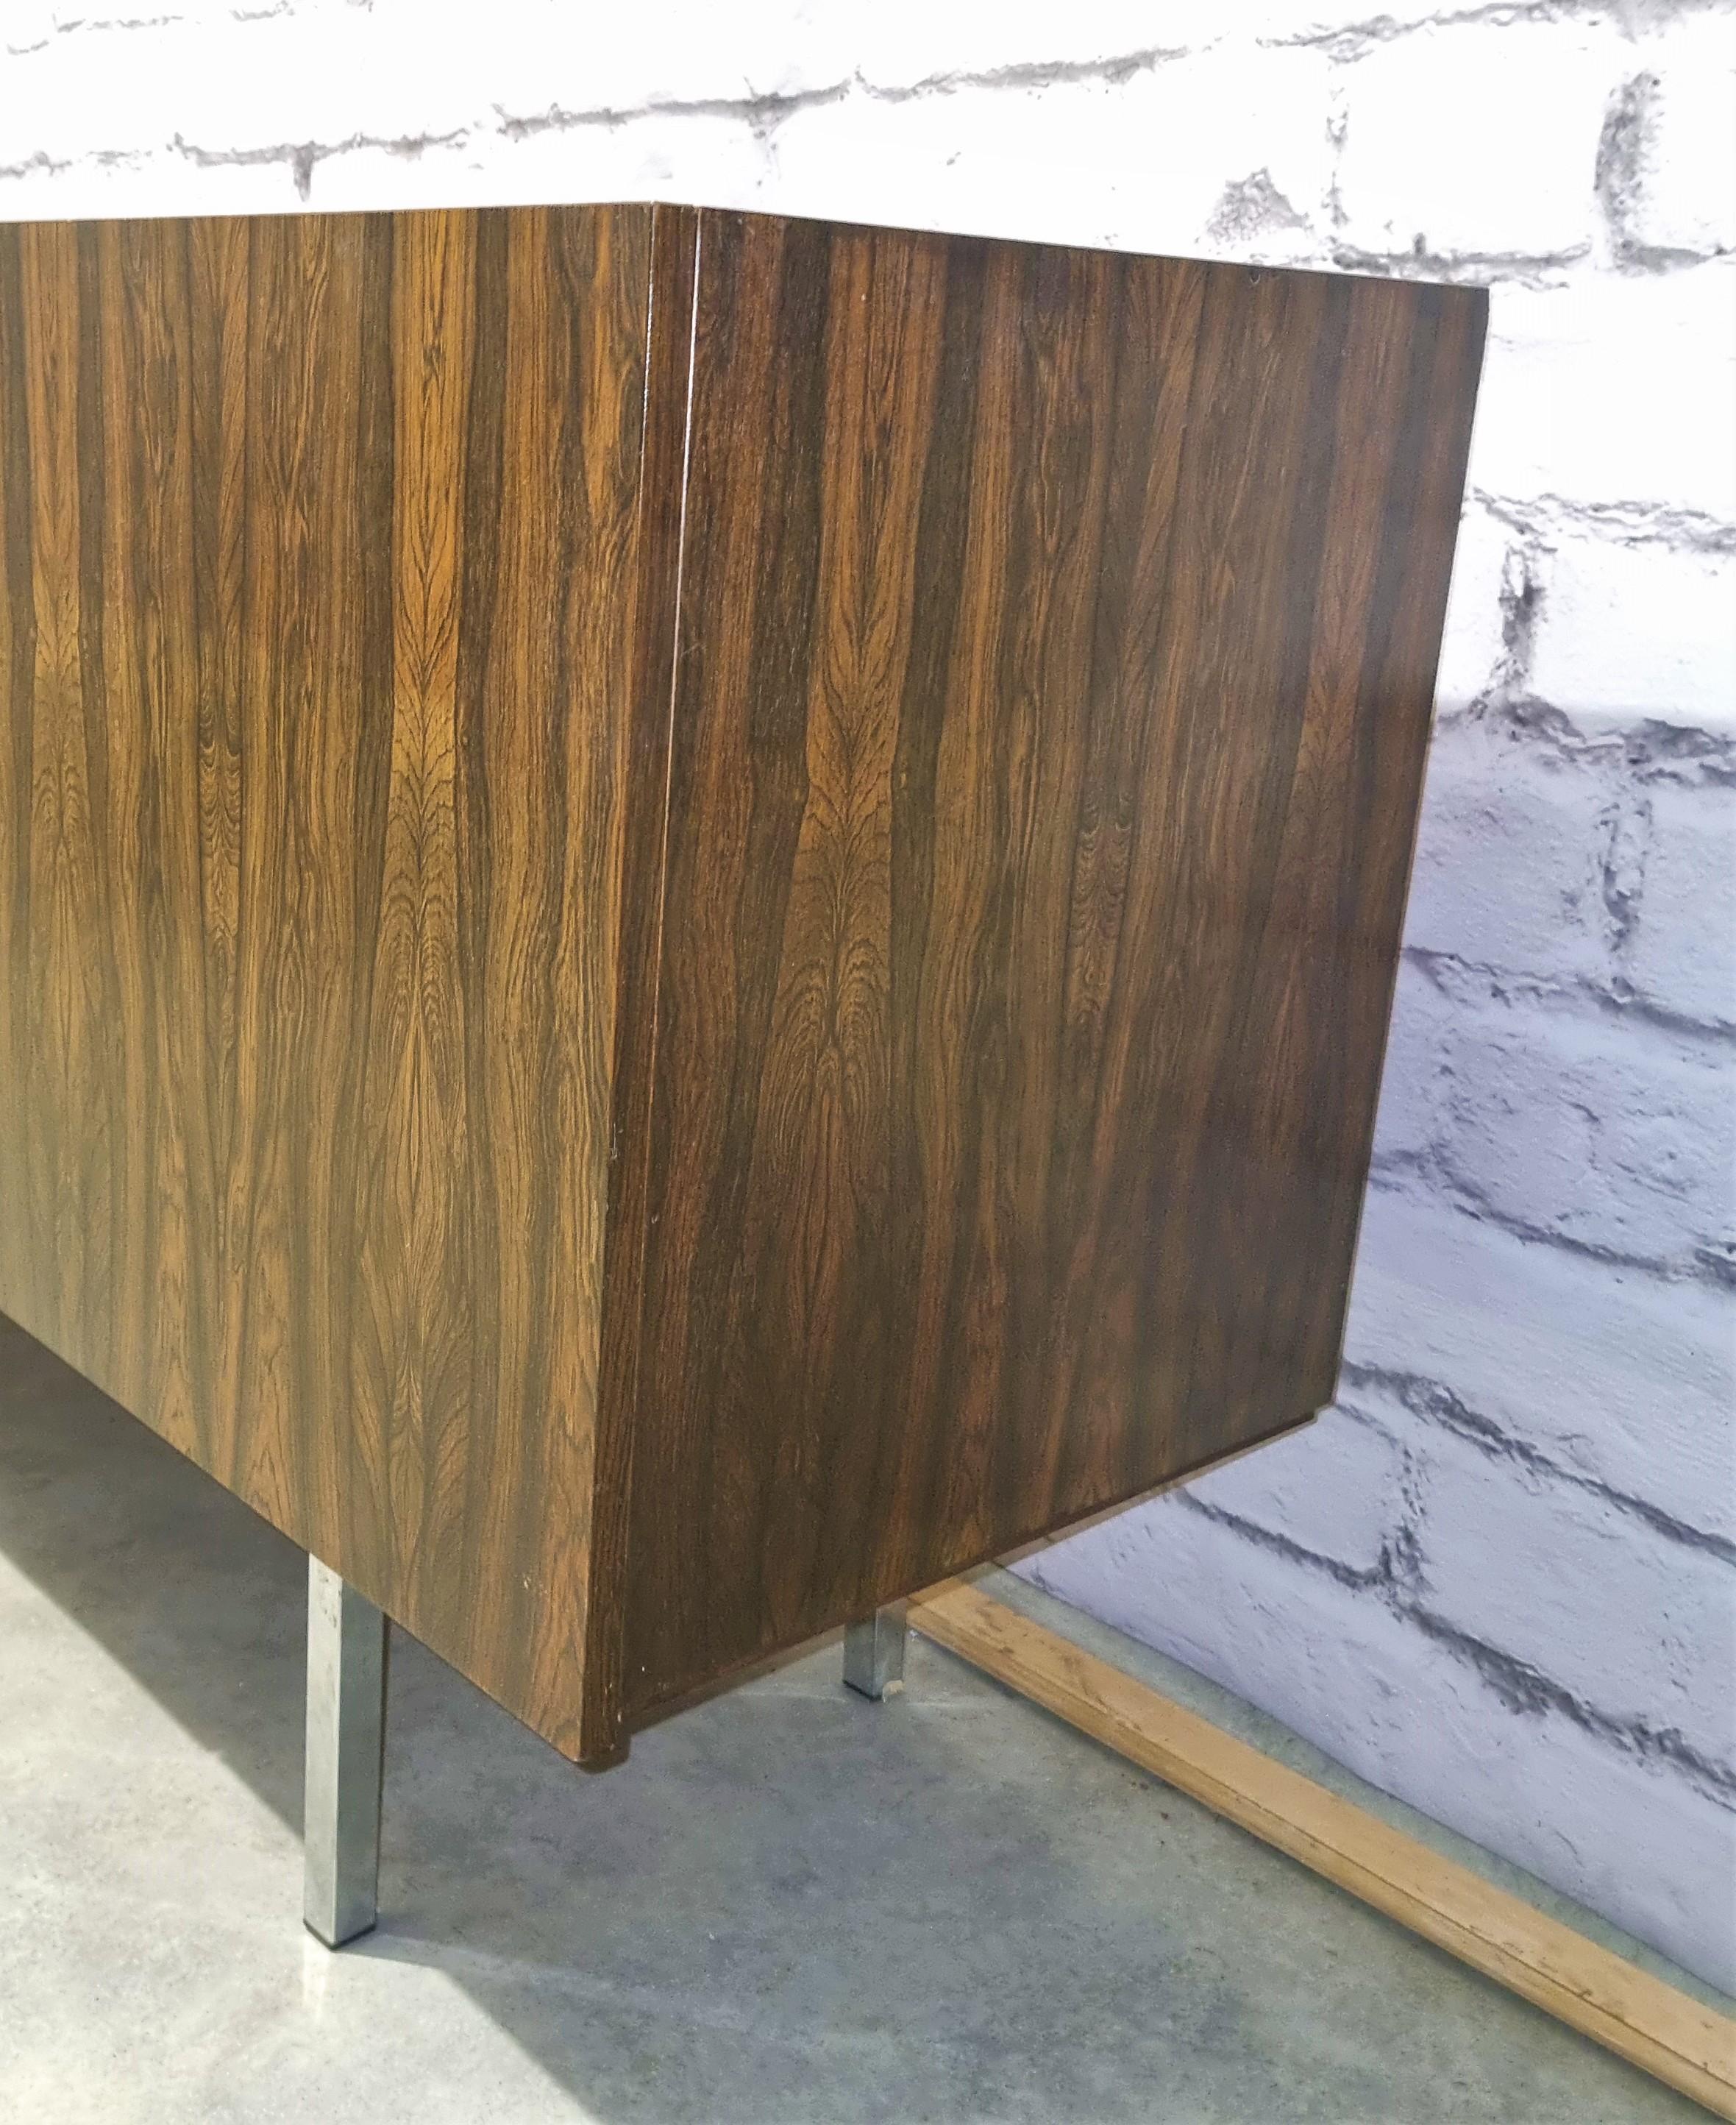 Exceptional Scandinavian sideboard in rosewood. This large piece of furniture opens with four doors revealing shelves on each side. It rests on 4 chrome legs. It is in very good condition with little signes of use according to its age.